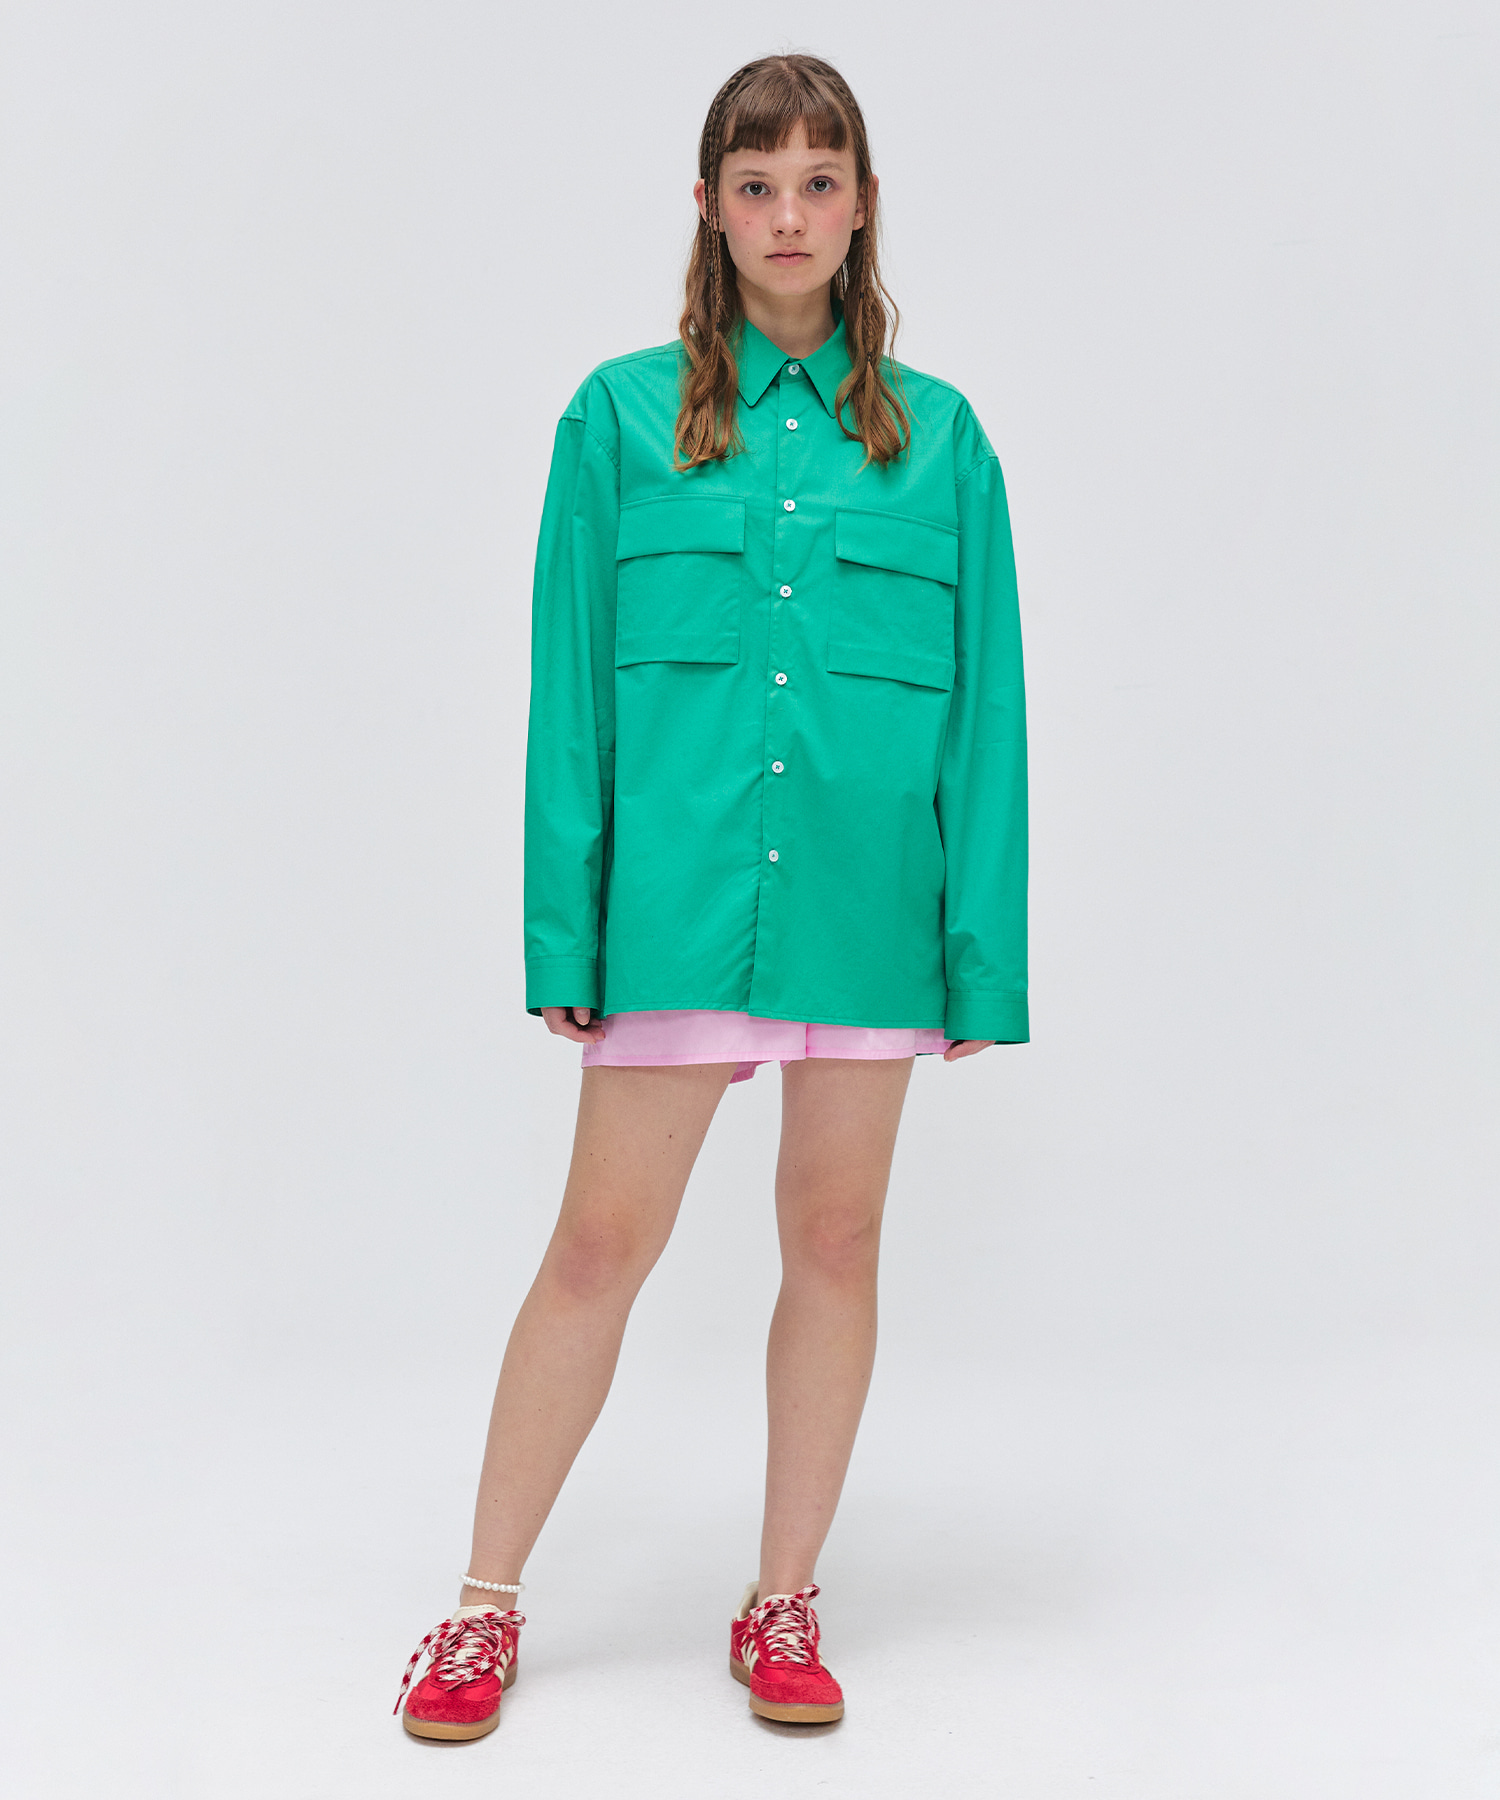 Double Out Pocket Shirt - Green